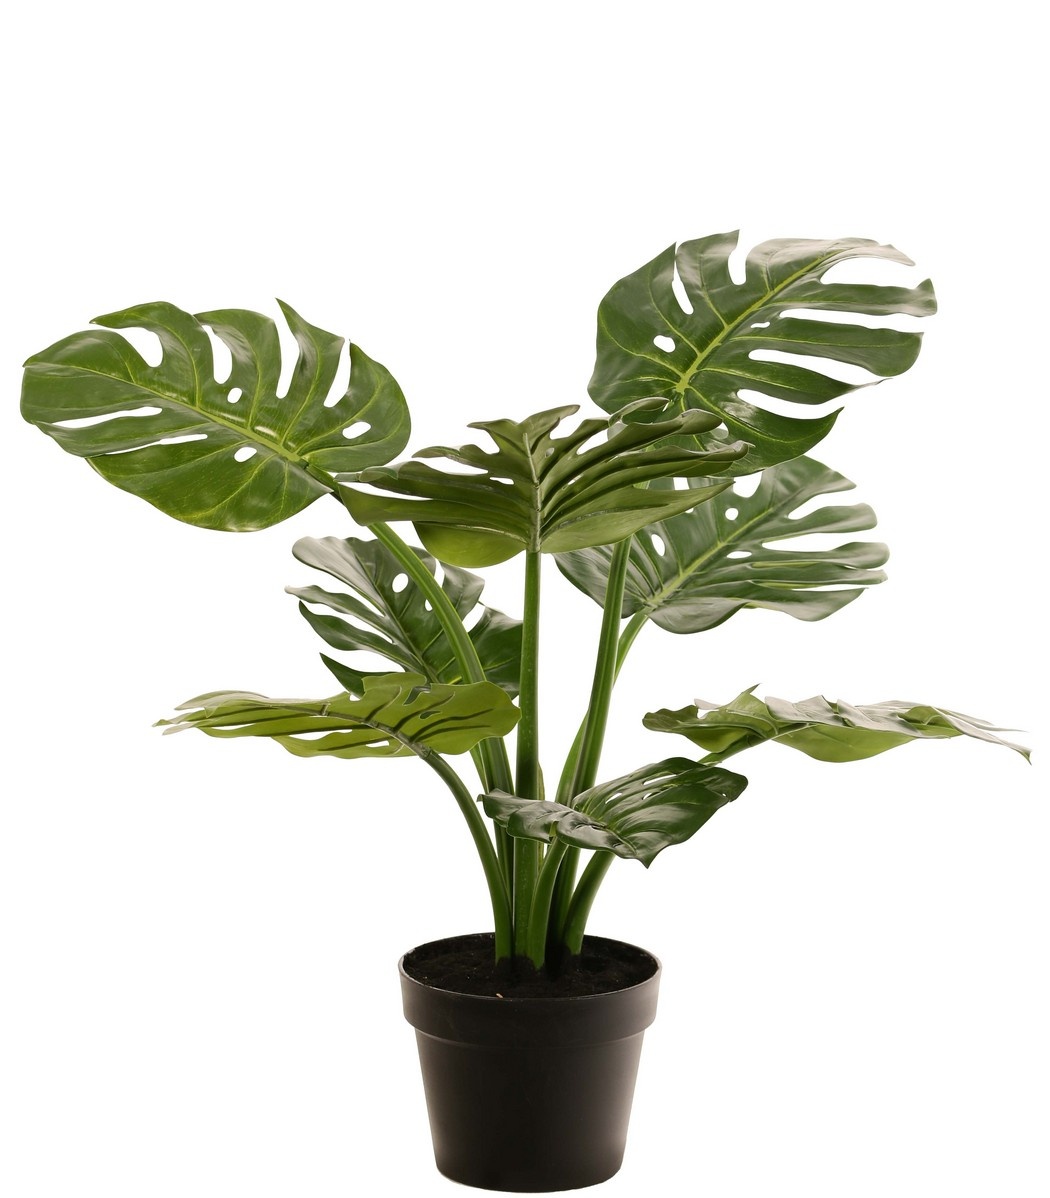 Monstera (Delicious window leaf) 'Mai Po', with 9 shoots and 8 leaves, in a pot, 60 cm